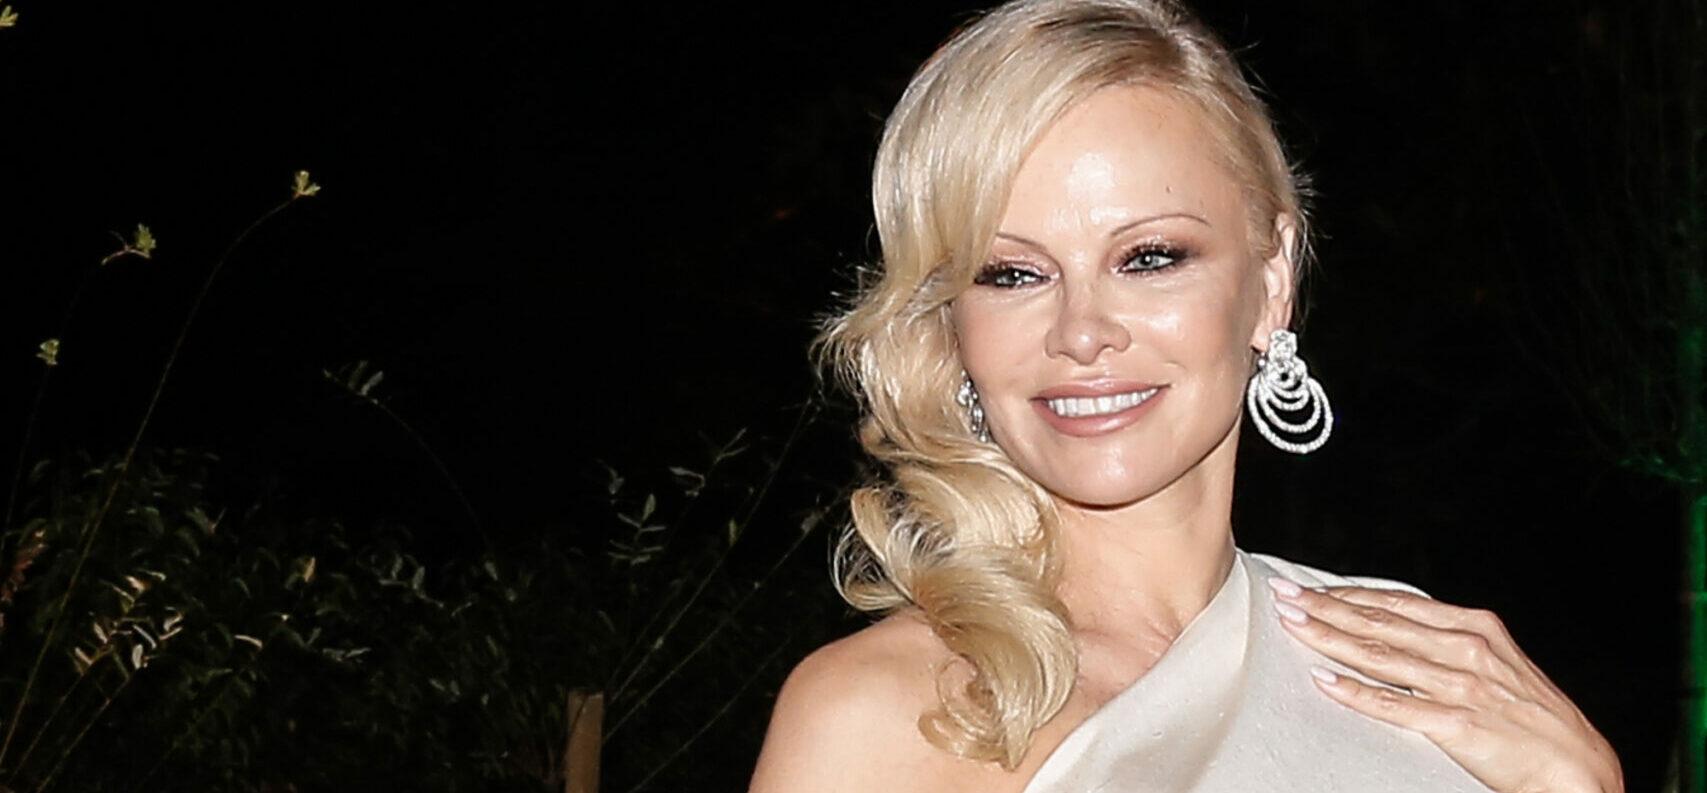 Pamela Anderson arriving at the Diner de la Mode for Sidaction in Paris during the Fashion week 2019